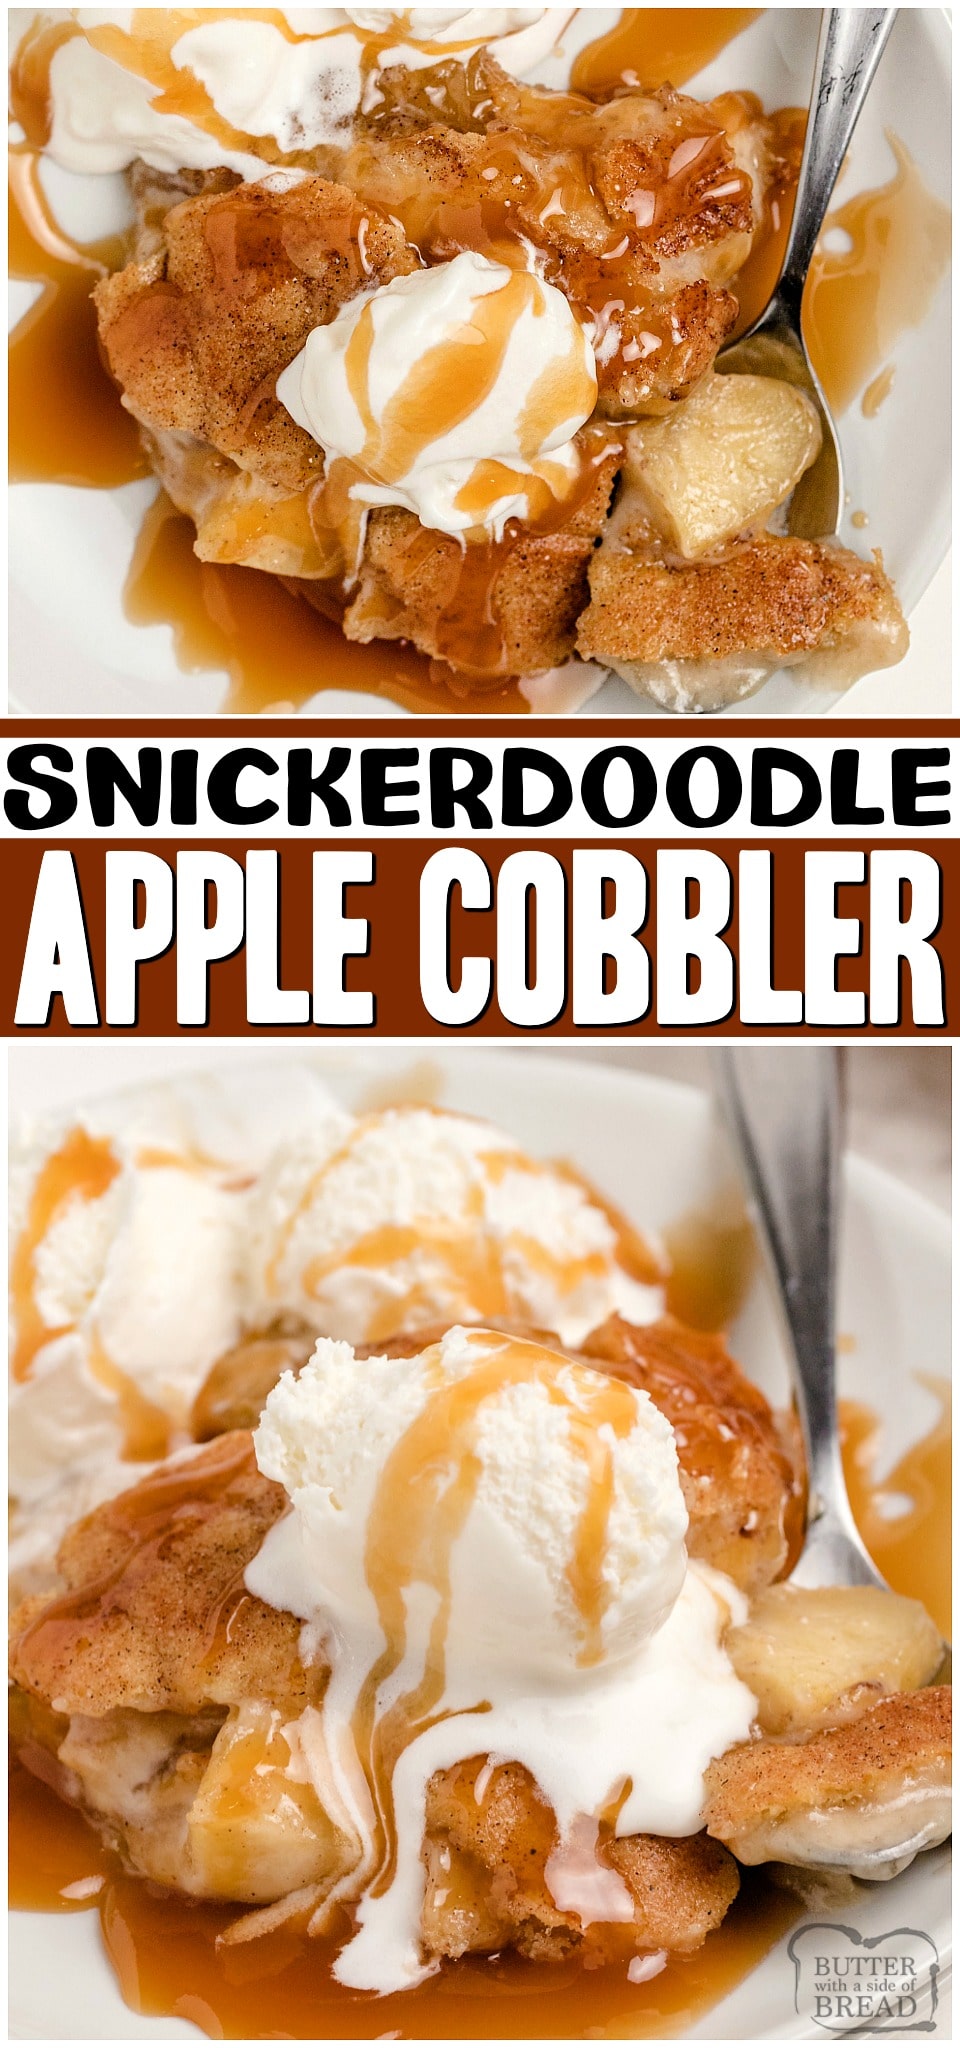 Snickerdoodle Apple Cobbler is a tasty twist on a delicious apple cobbler. Sweet apple pie filling baked between layers of with Snickerdoodle cookie dough then topped with caramel drizzle and vanilla ice cream!